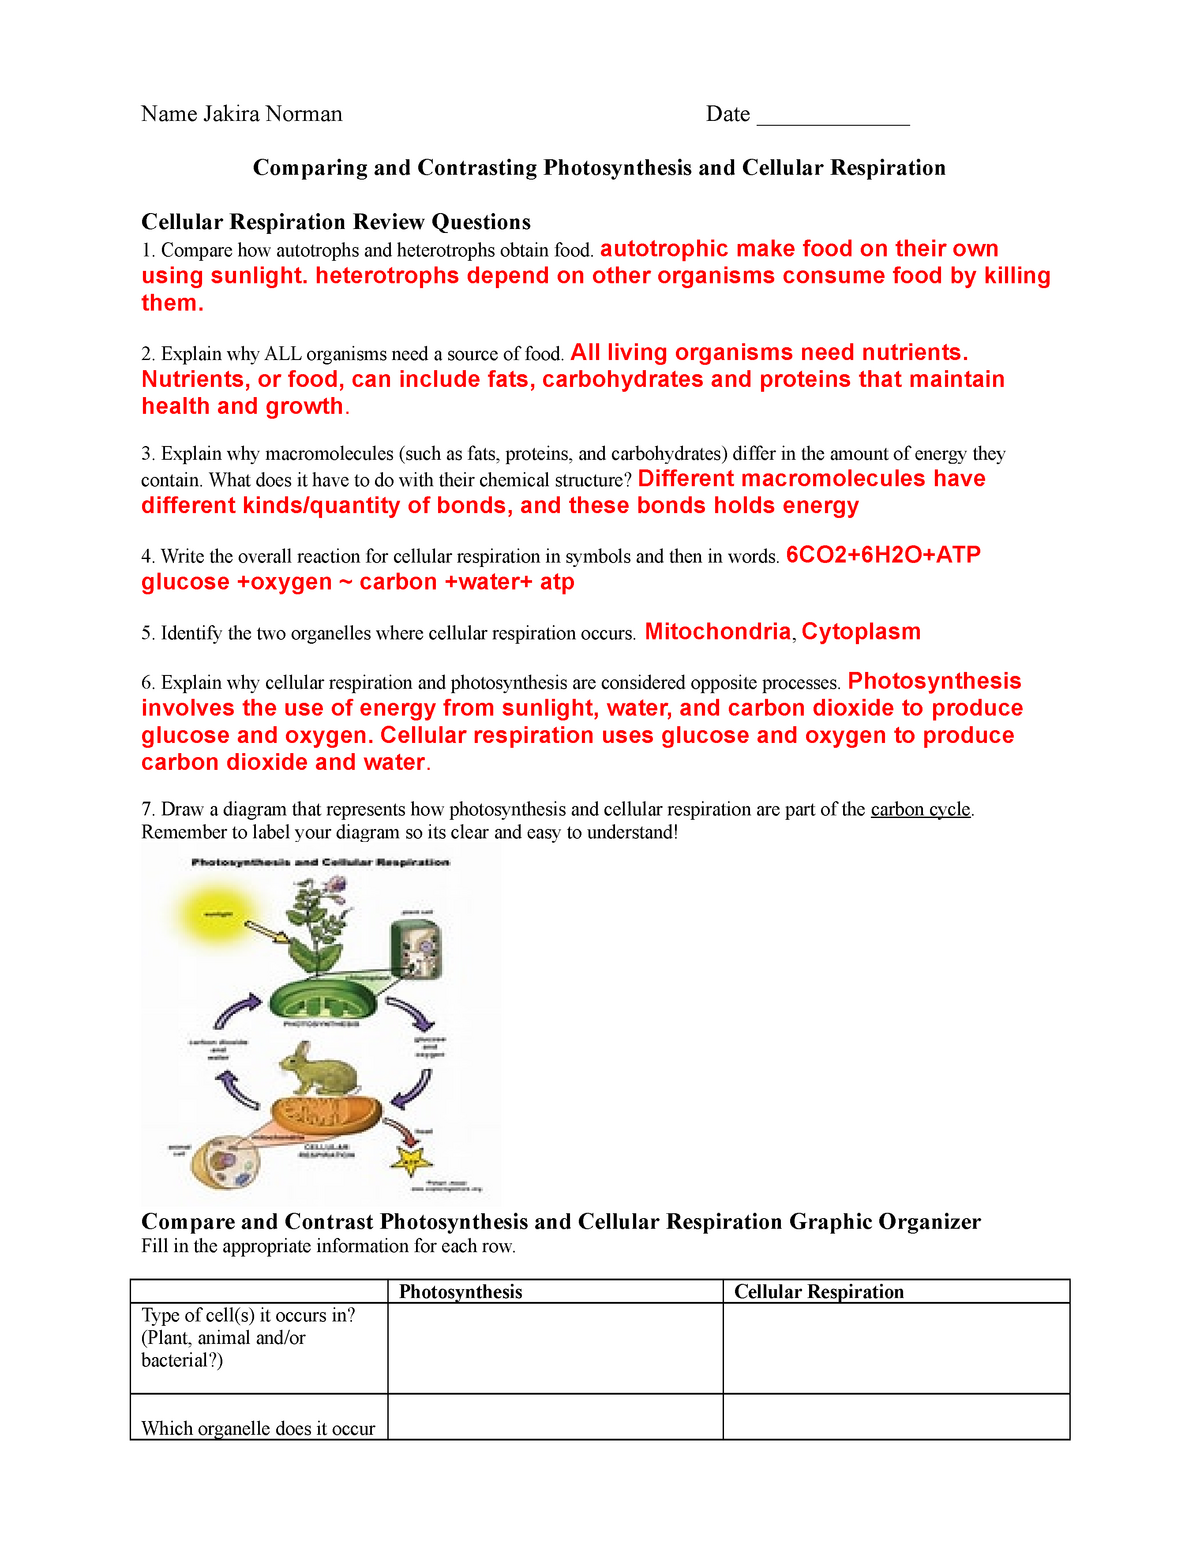 photosynthesis compare and contrast worksheet answers